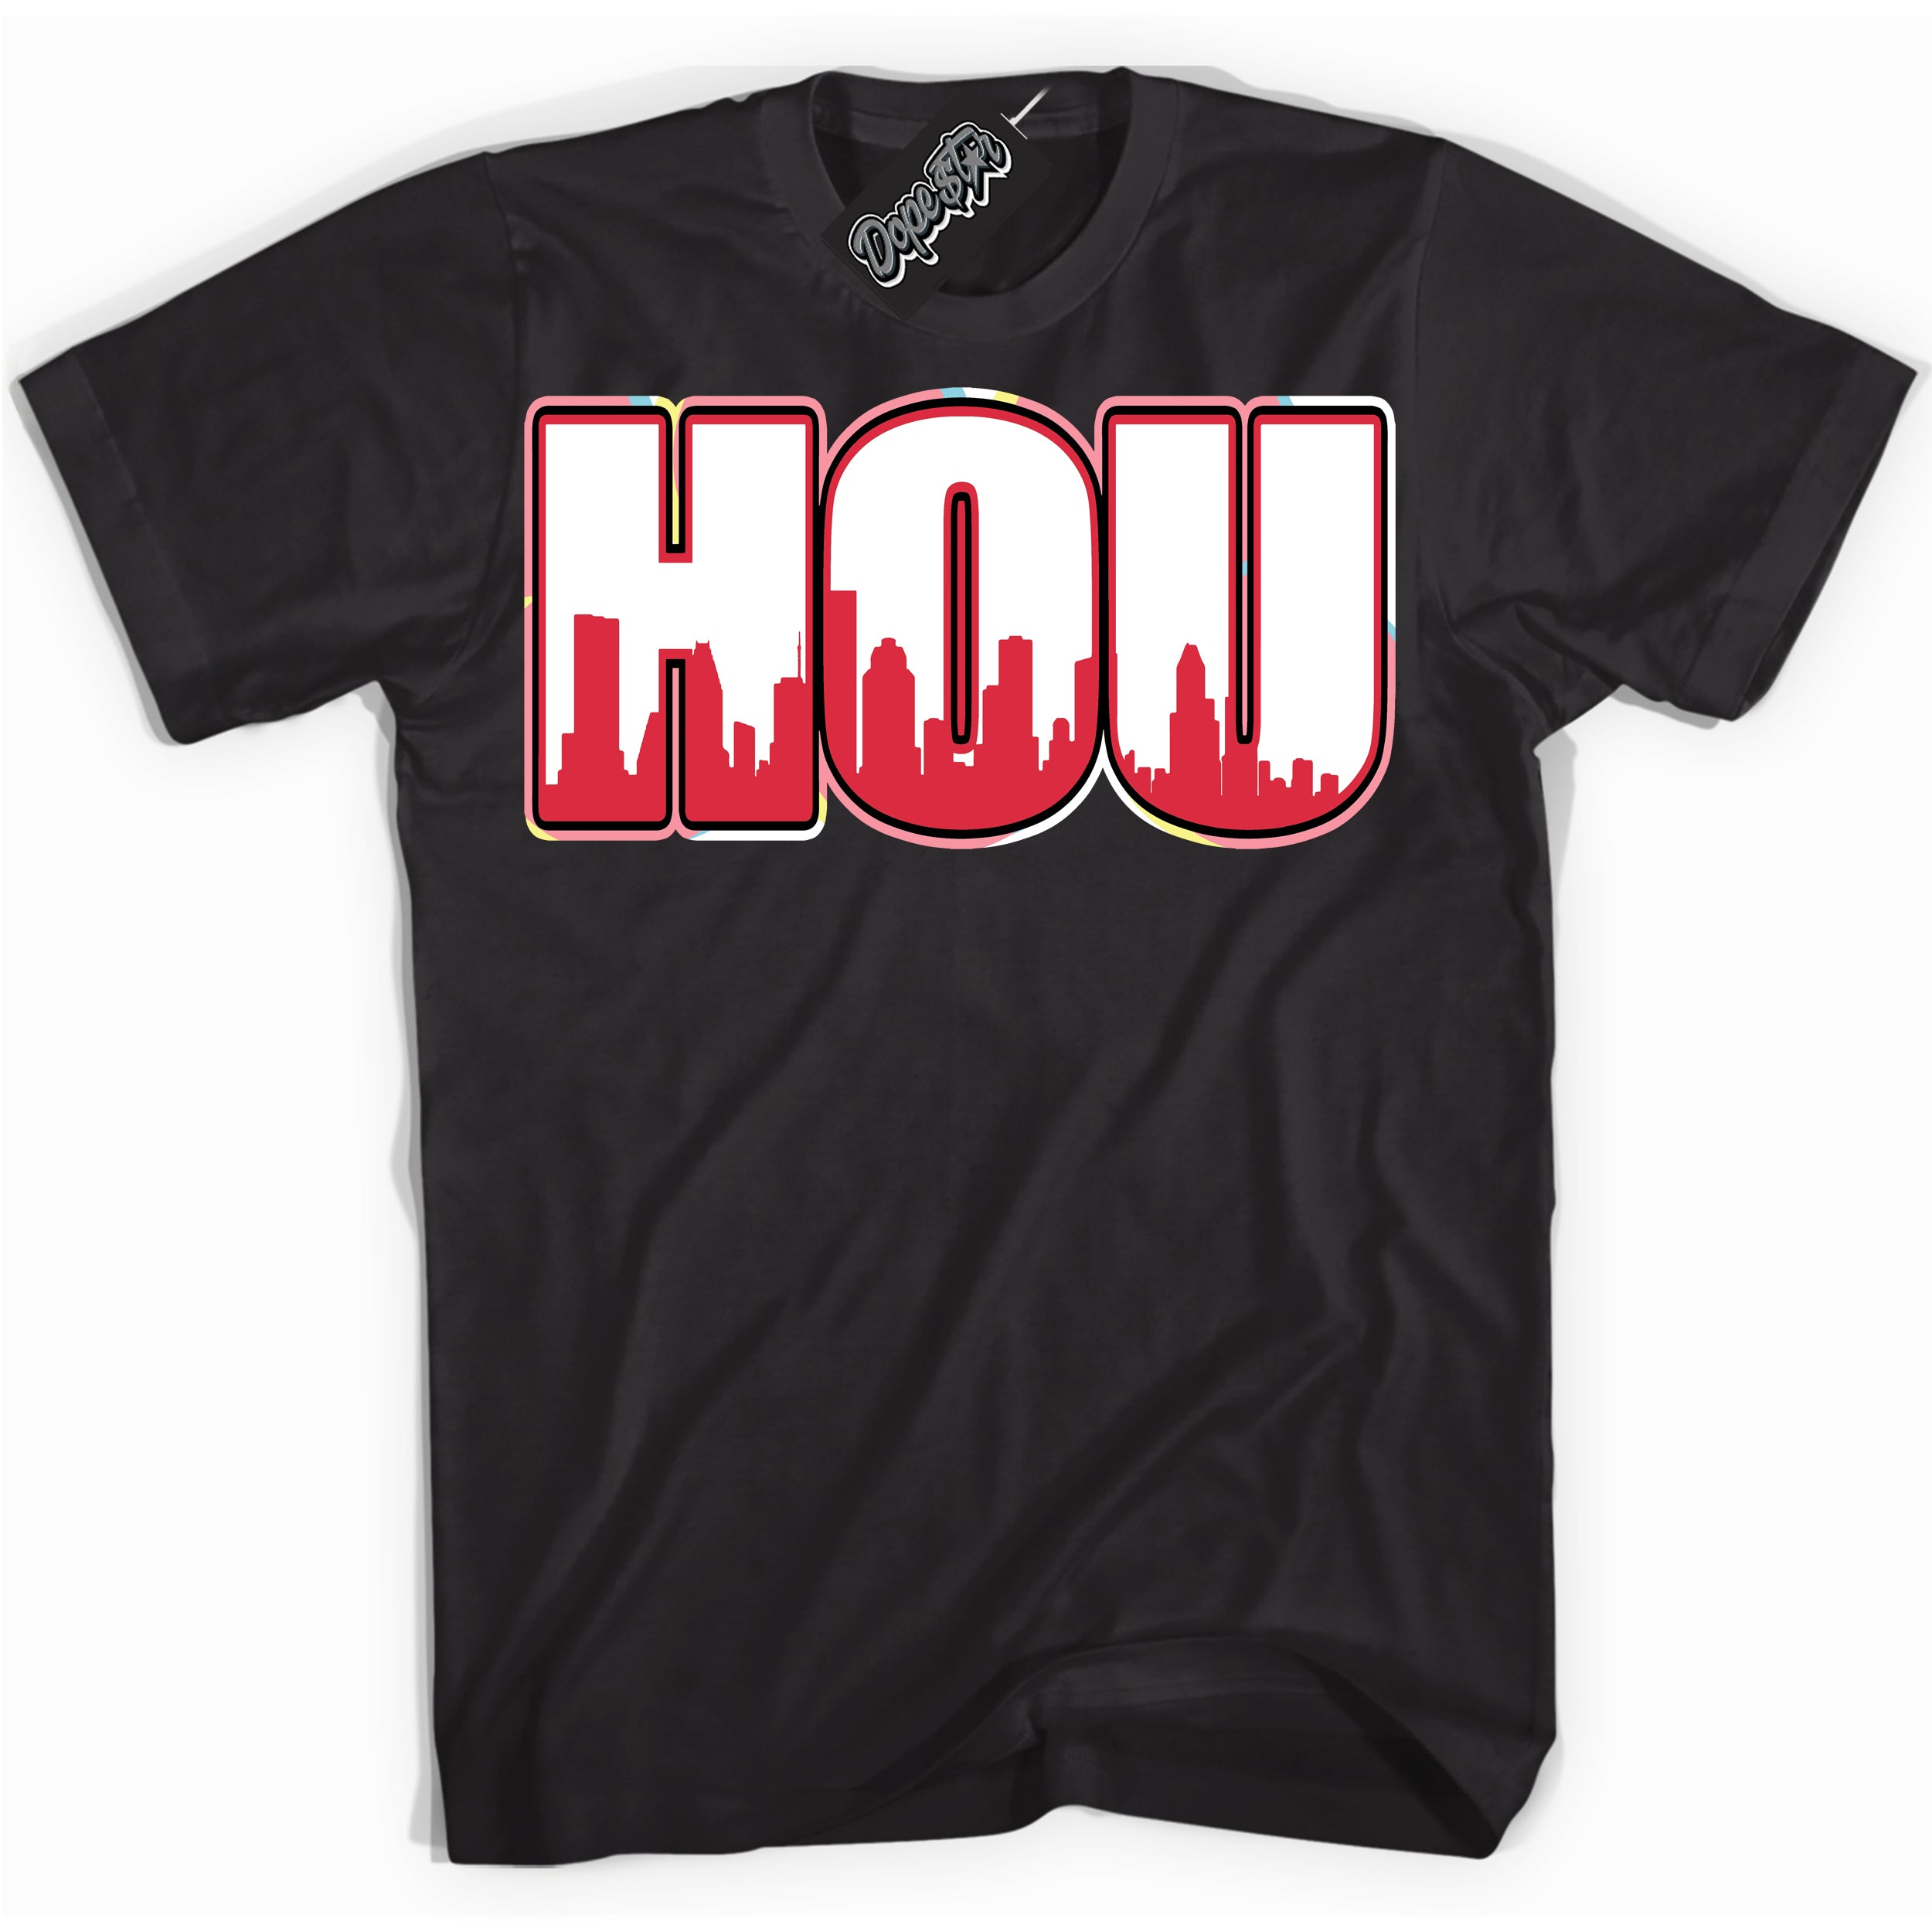 Cool Black graphic tee with “ Houston ” design, that perfectly matches Spider-Verse 1s sneakers 